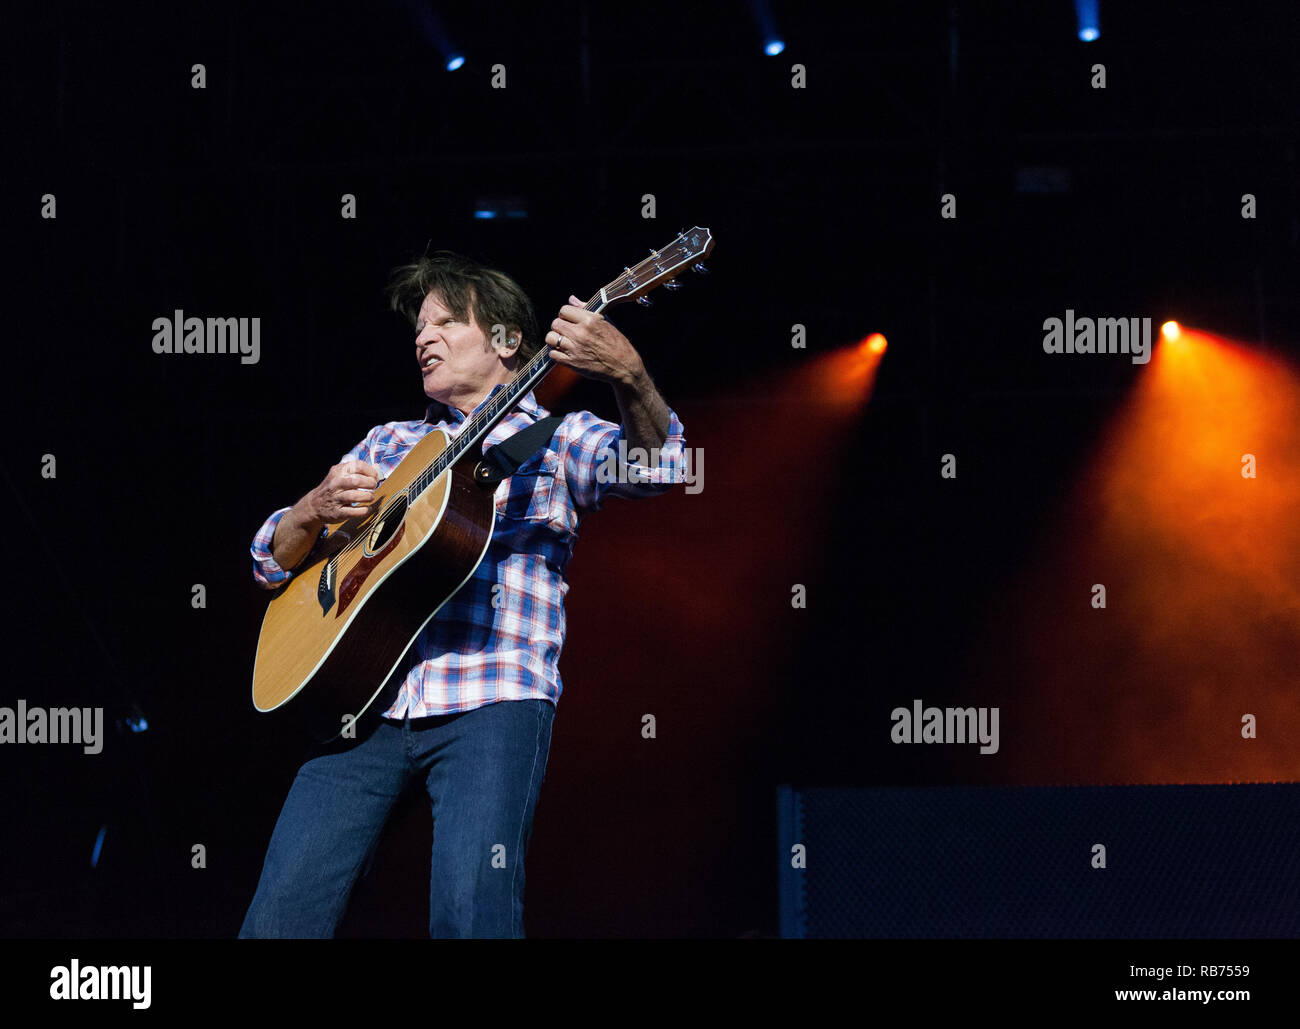 The American singer, songwriter and musician John Fogerty performs a live concert at the Danish music festival Jelling Festival 2014. John Fogerty is previously known as the singer and lead guitarist for the band Creedence Clearwater Revival. Denmark, 31/05 2014. EXCLUDING DENMARK. Stock Photo